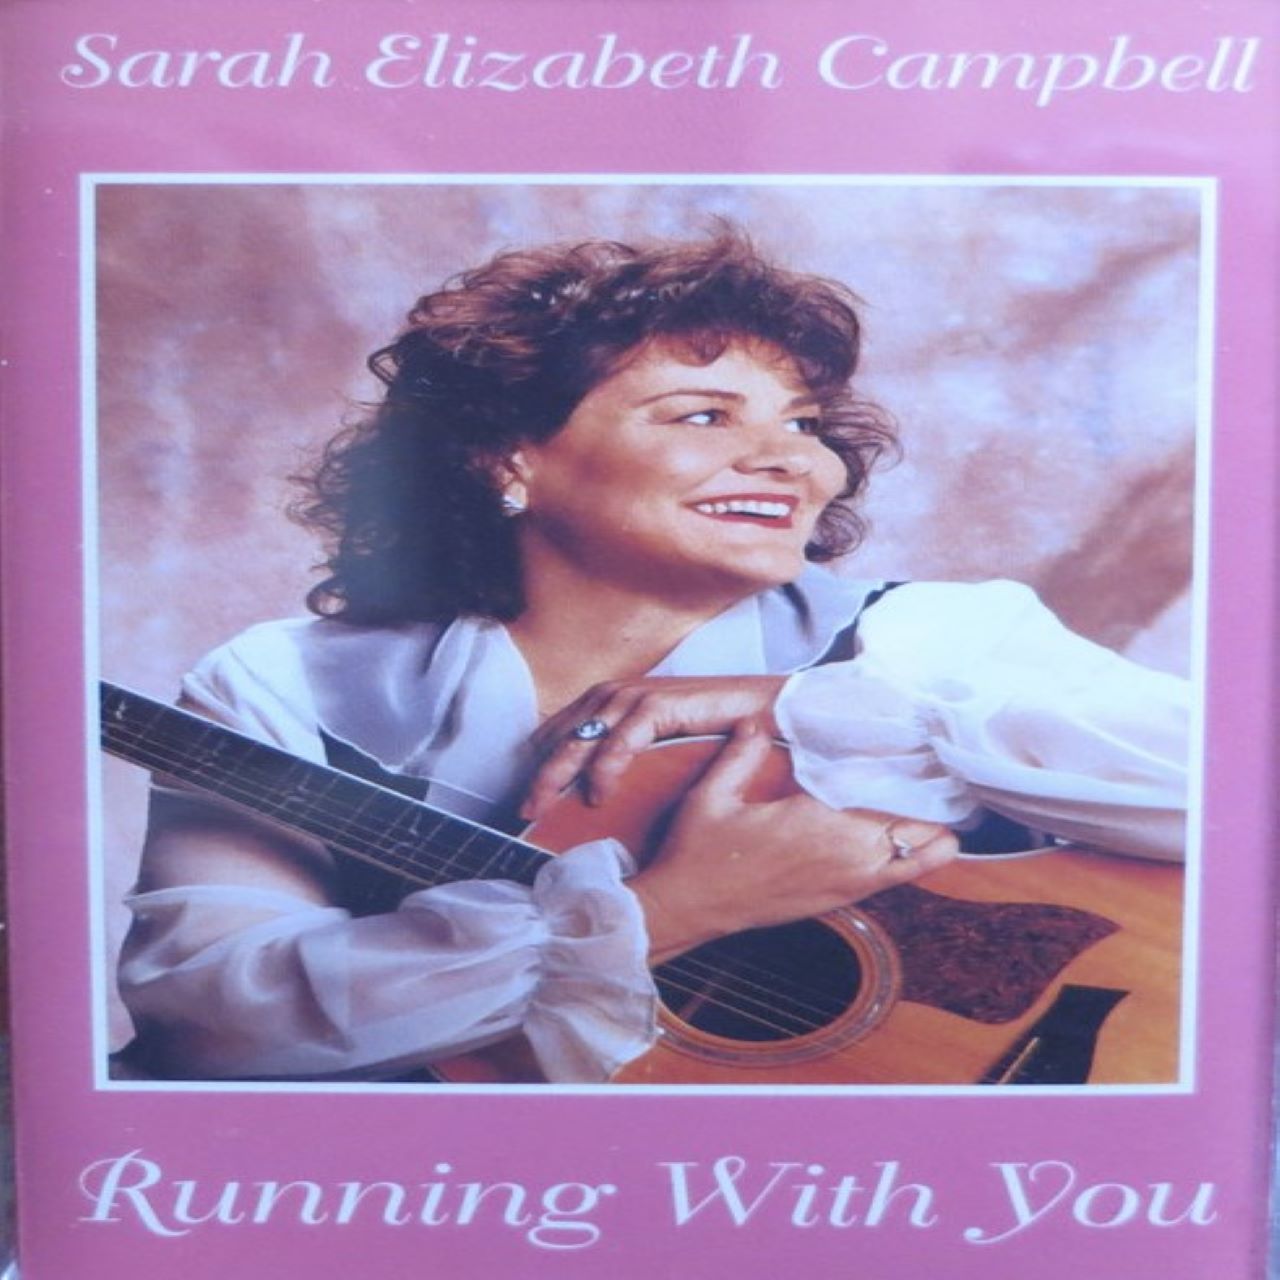 Sarah Elizabeth Campbell - Running With You cover album